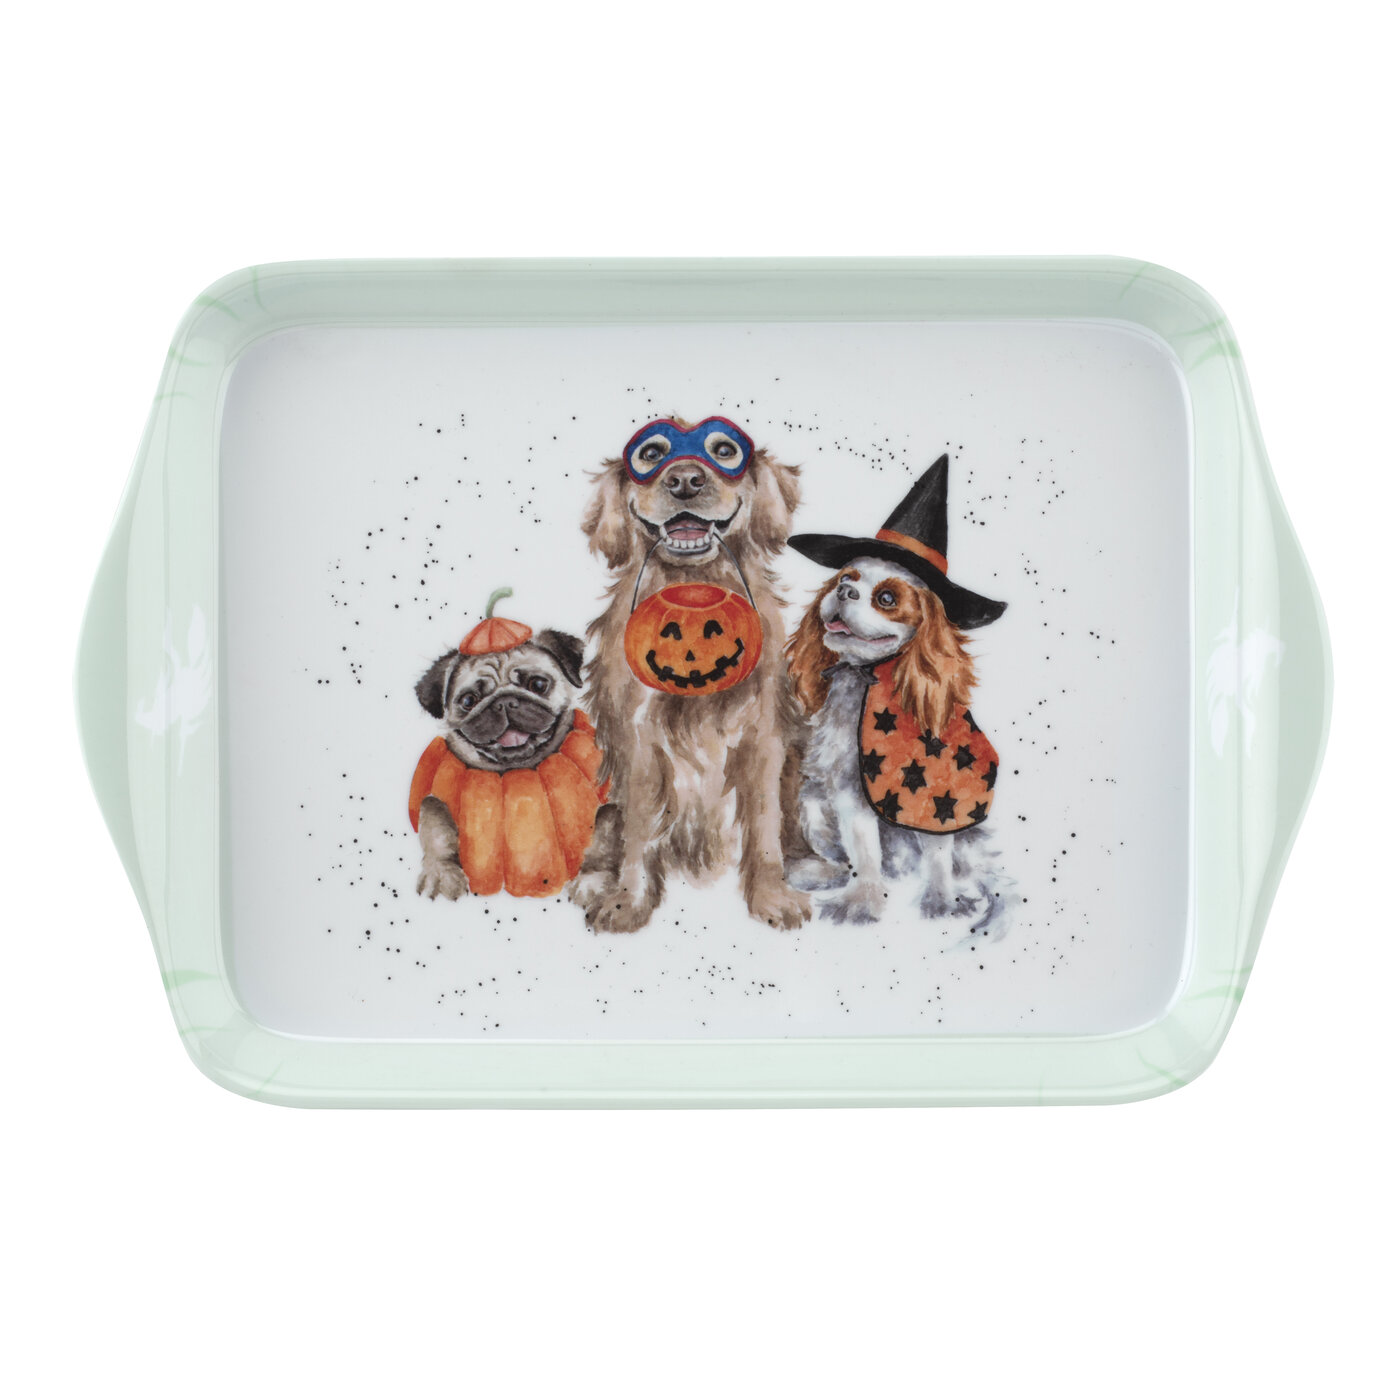 Trick or Treat 3 Piece Mug & Tray Set (Dogs/Cat) image number null